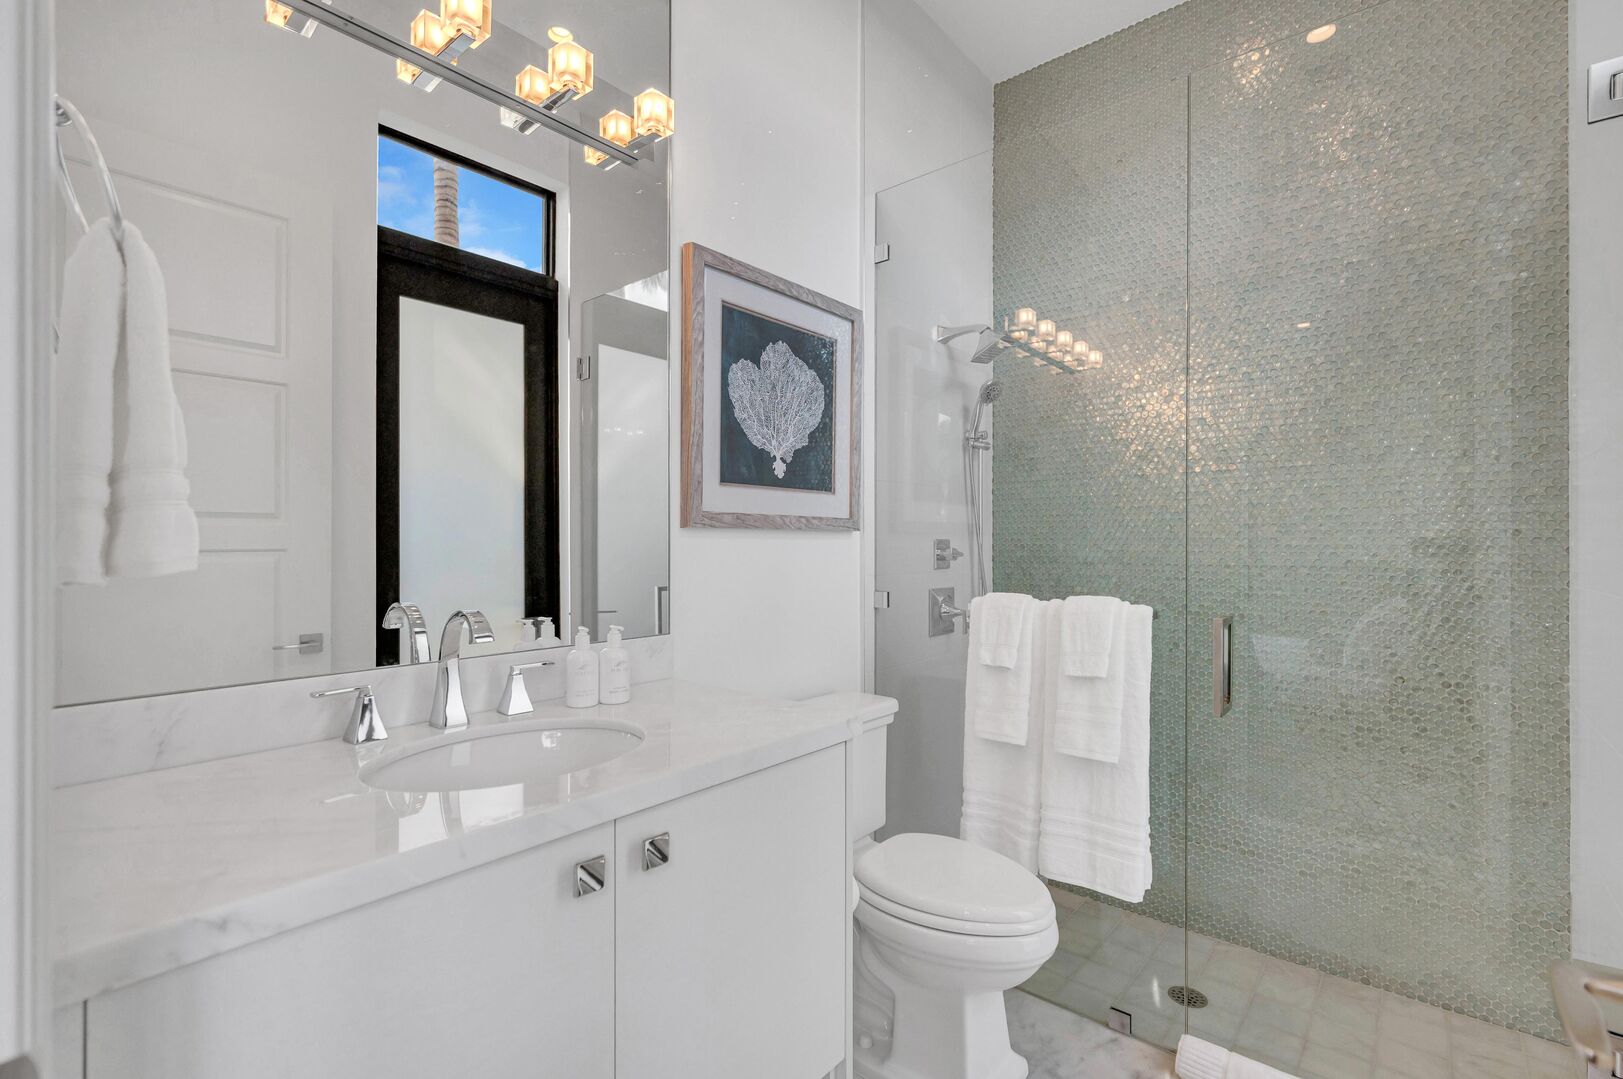 The bathroom of the seventh bedroom features a walk-in shower.